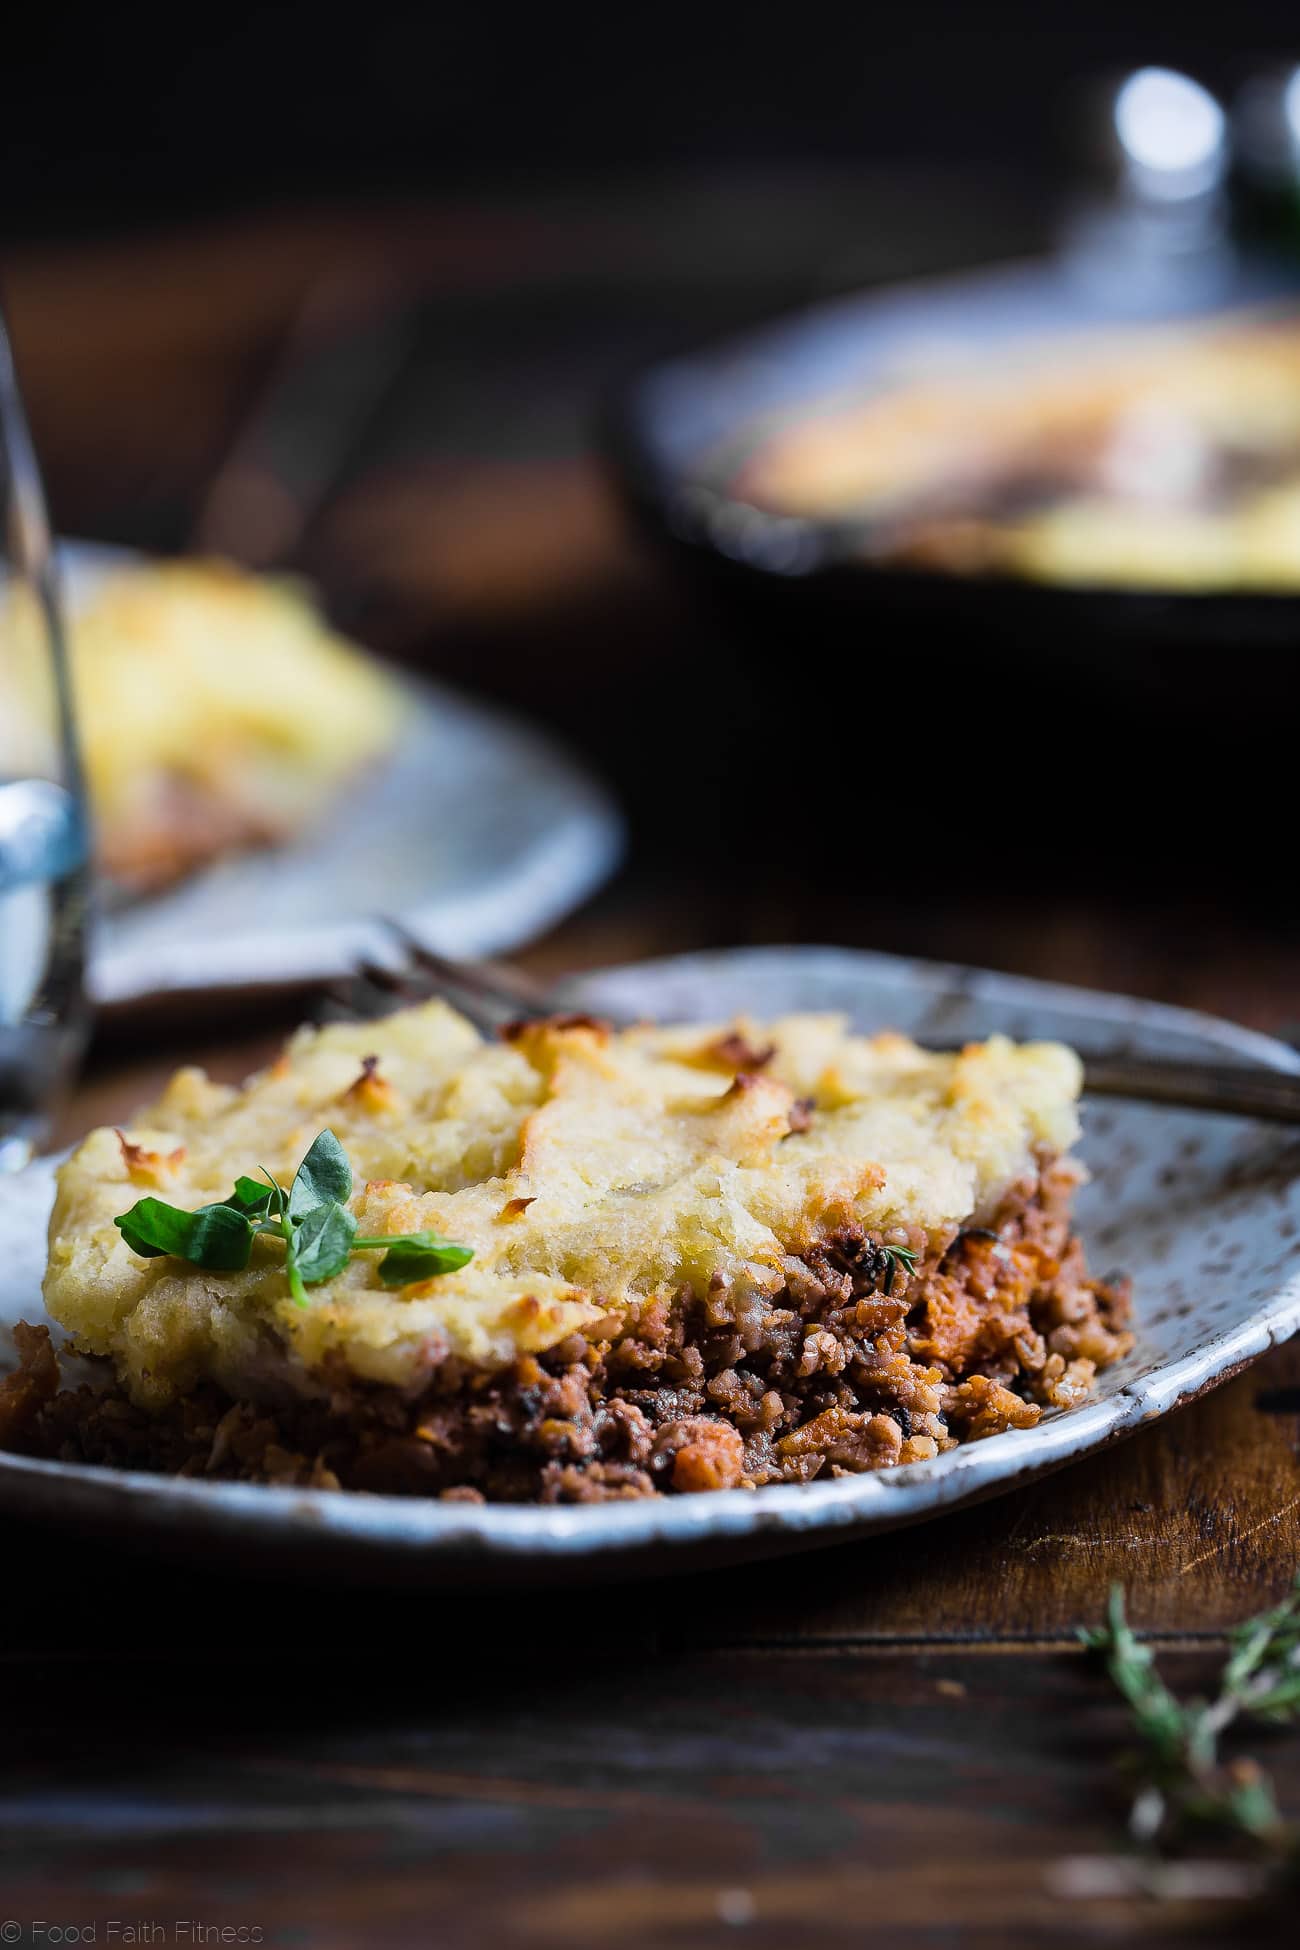 Vegetarian Shepherd's Pie - This whole30 and paleo shepherd's pie is a gluten, grain, and dairy free remake of the classic that is just as cozy and comforting! You'll never believe it's vegan friendly and healthy! | Foodfaithfitness.com | @FoodFaithFit